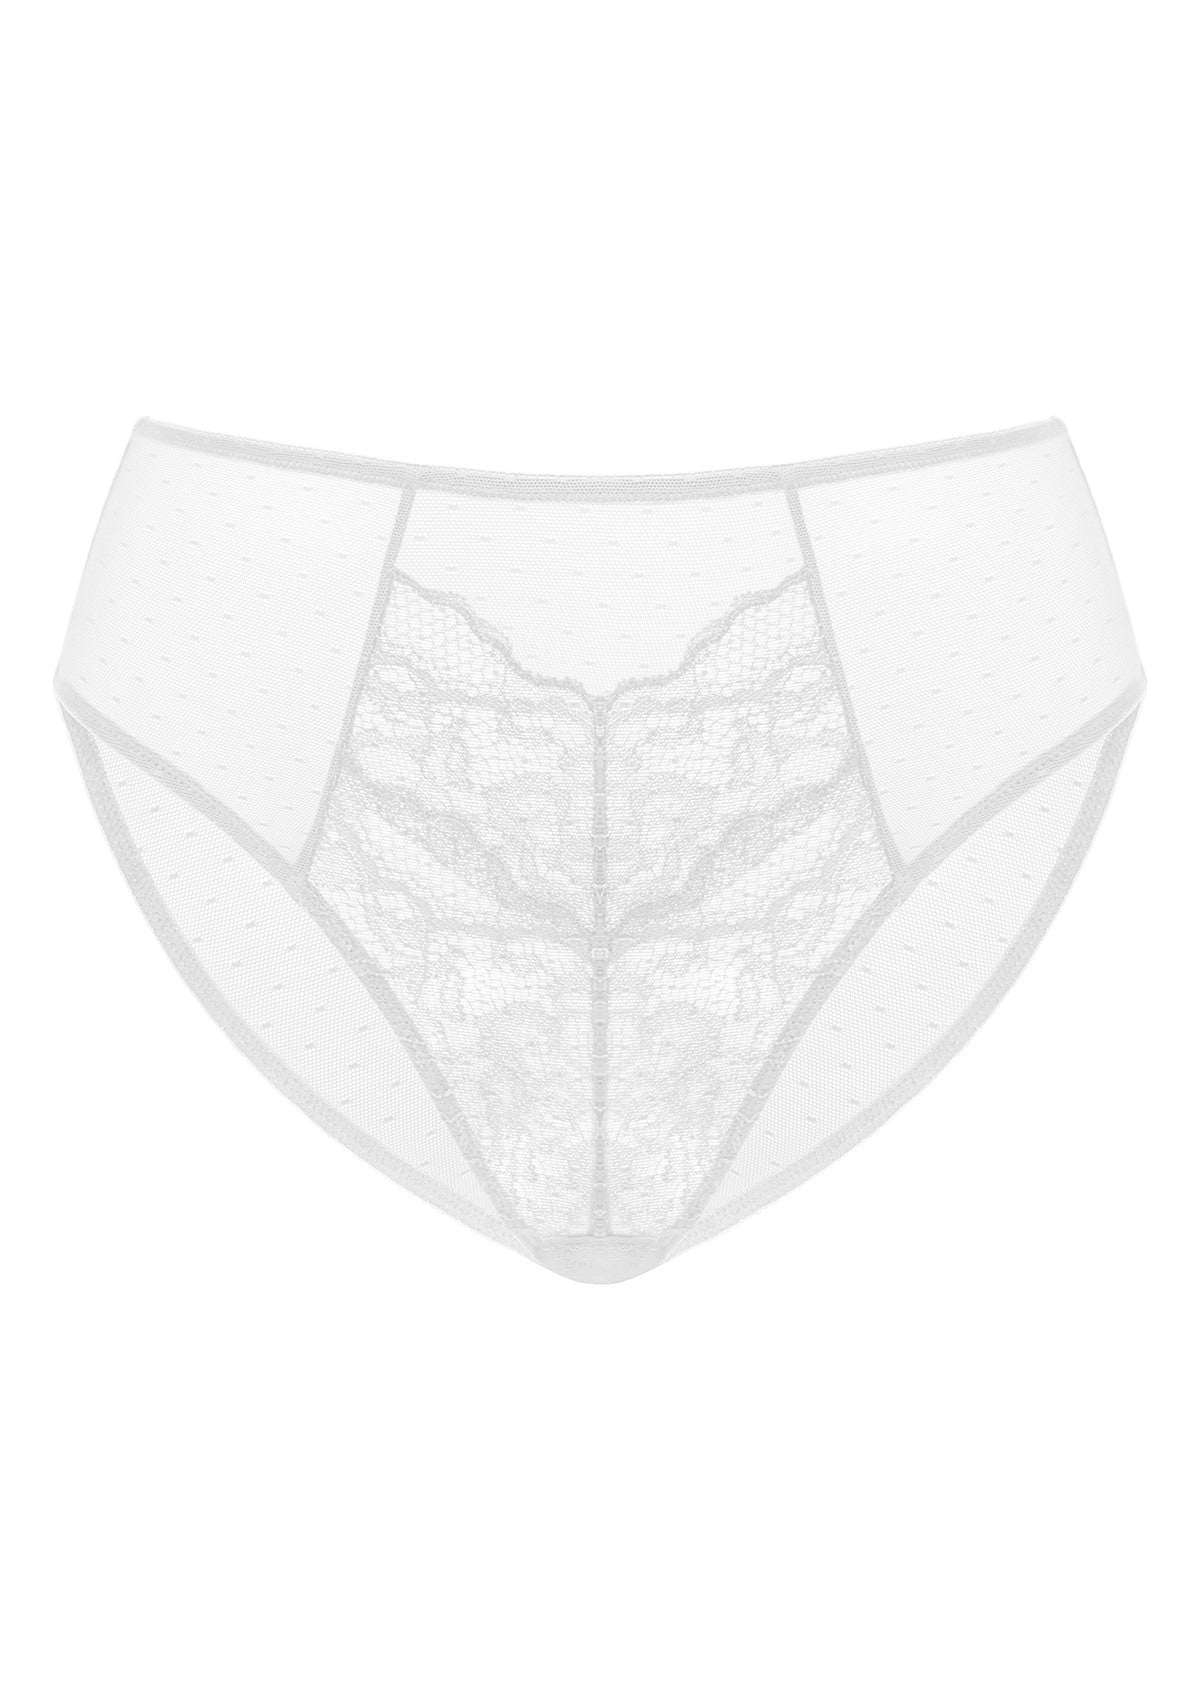 HSIA Enchante High-Rise Floral Lacy Panty-Comfort In Style - M / White